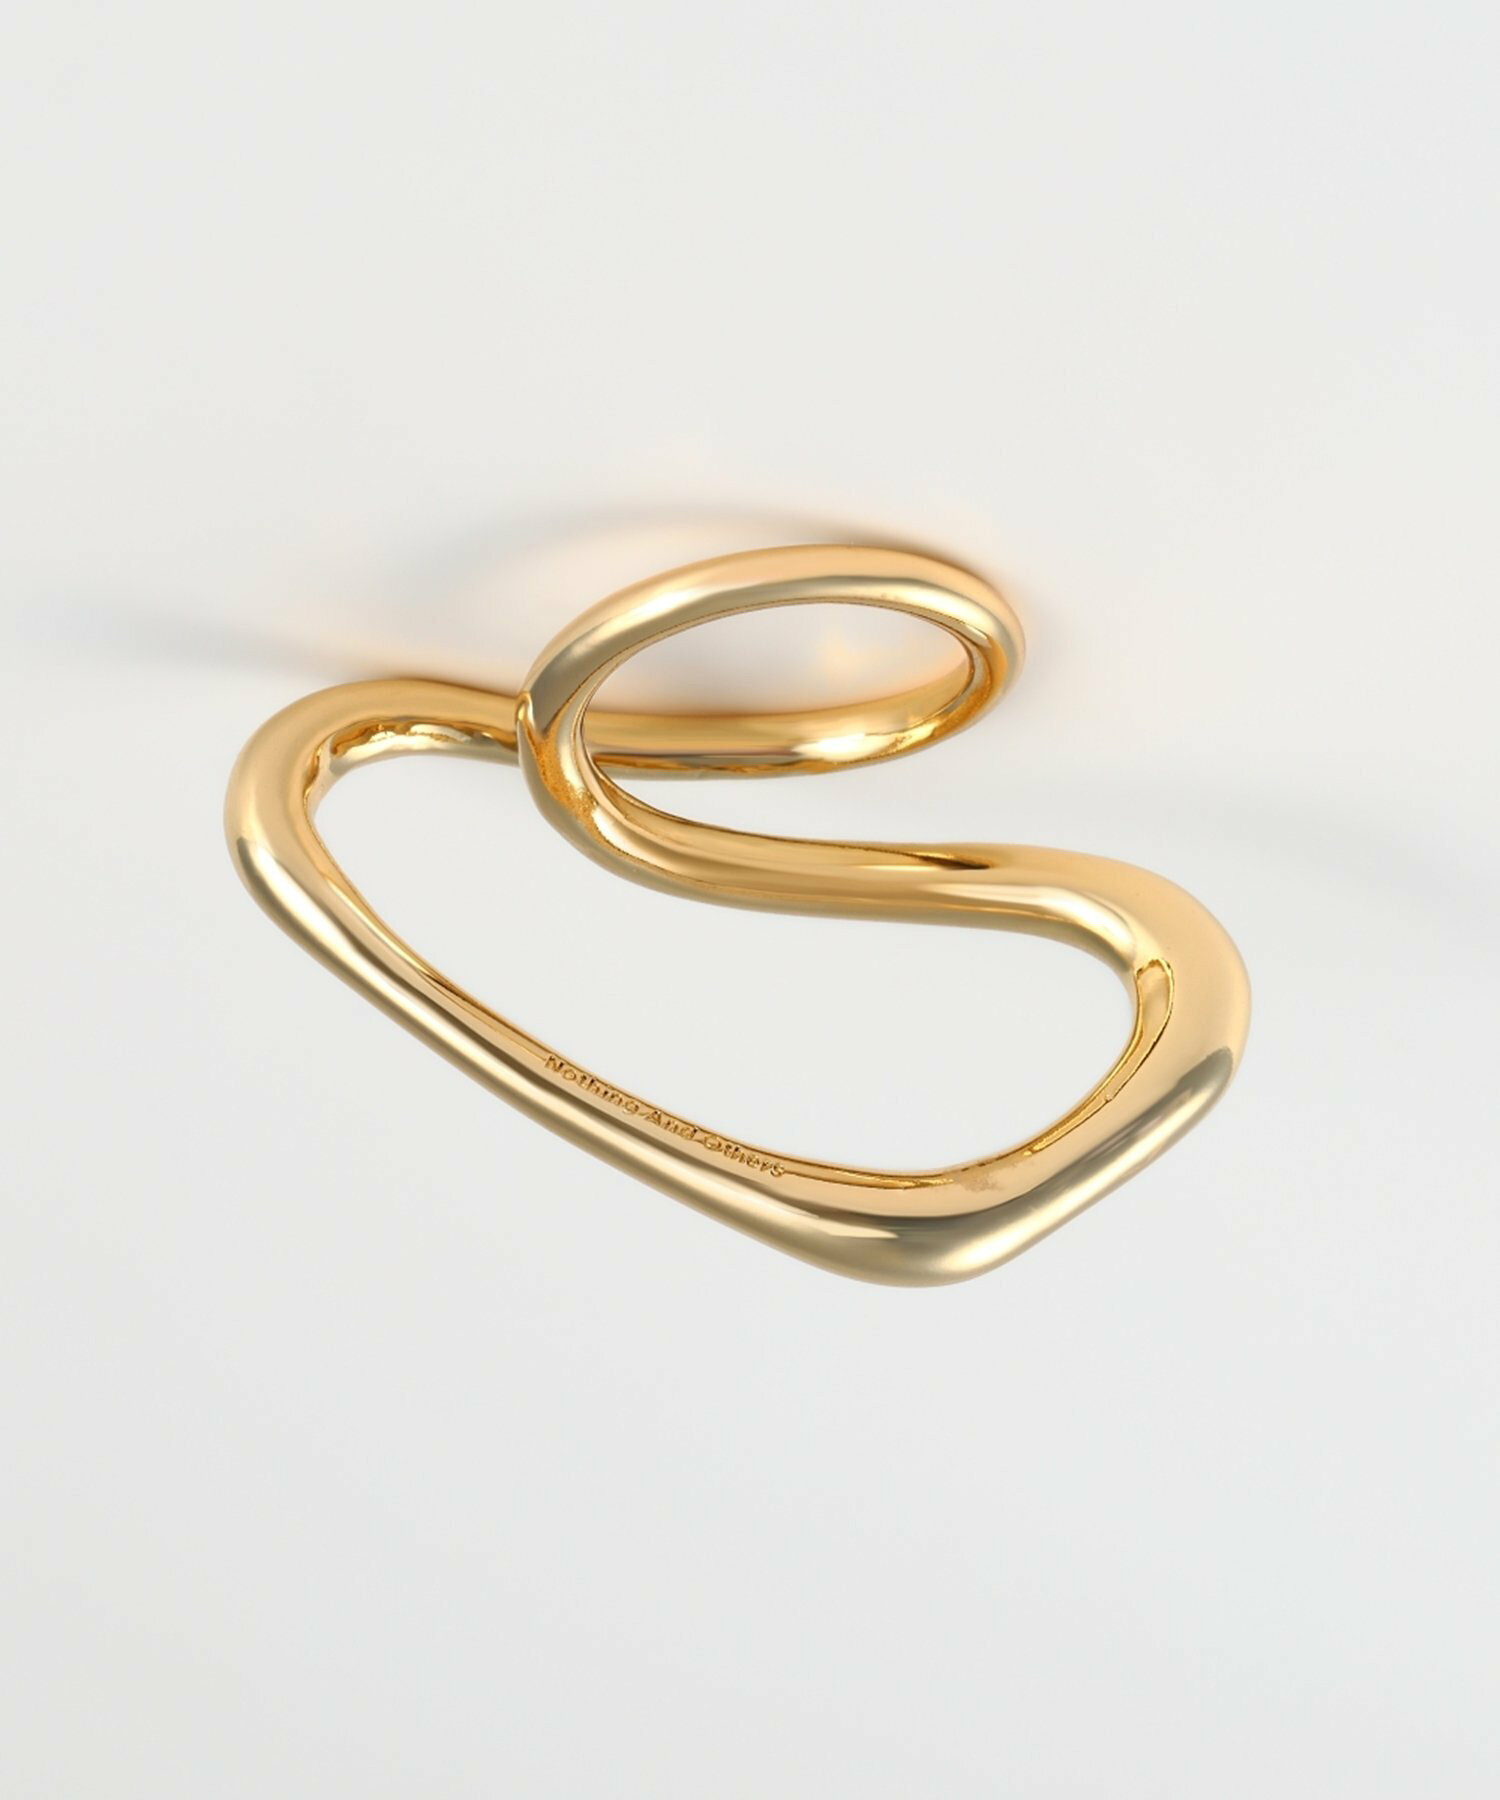 Nothing And Others/Nuance line ring